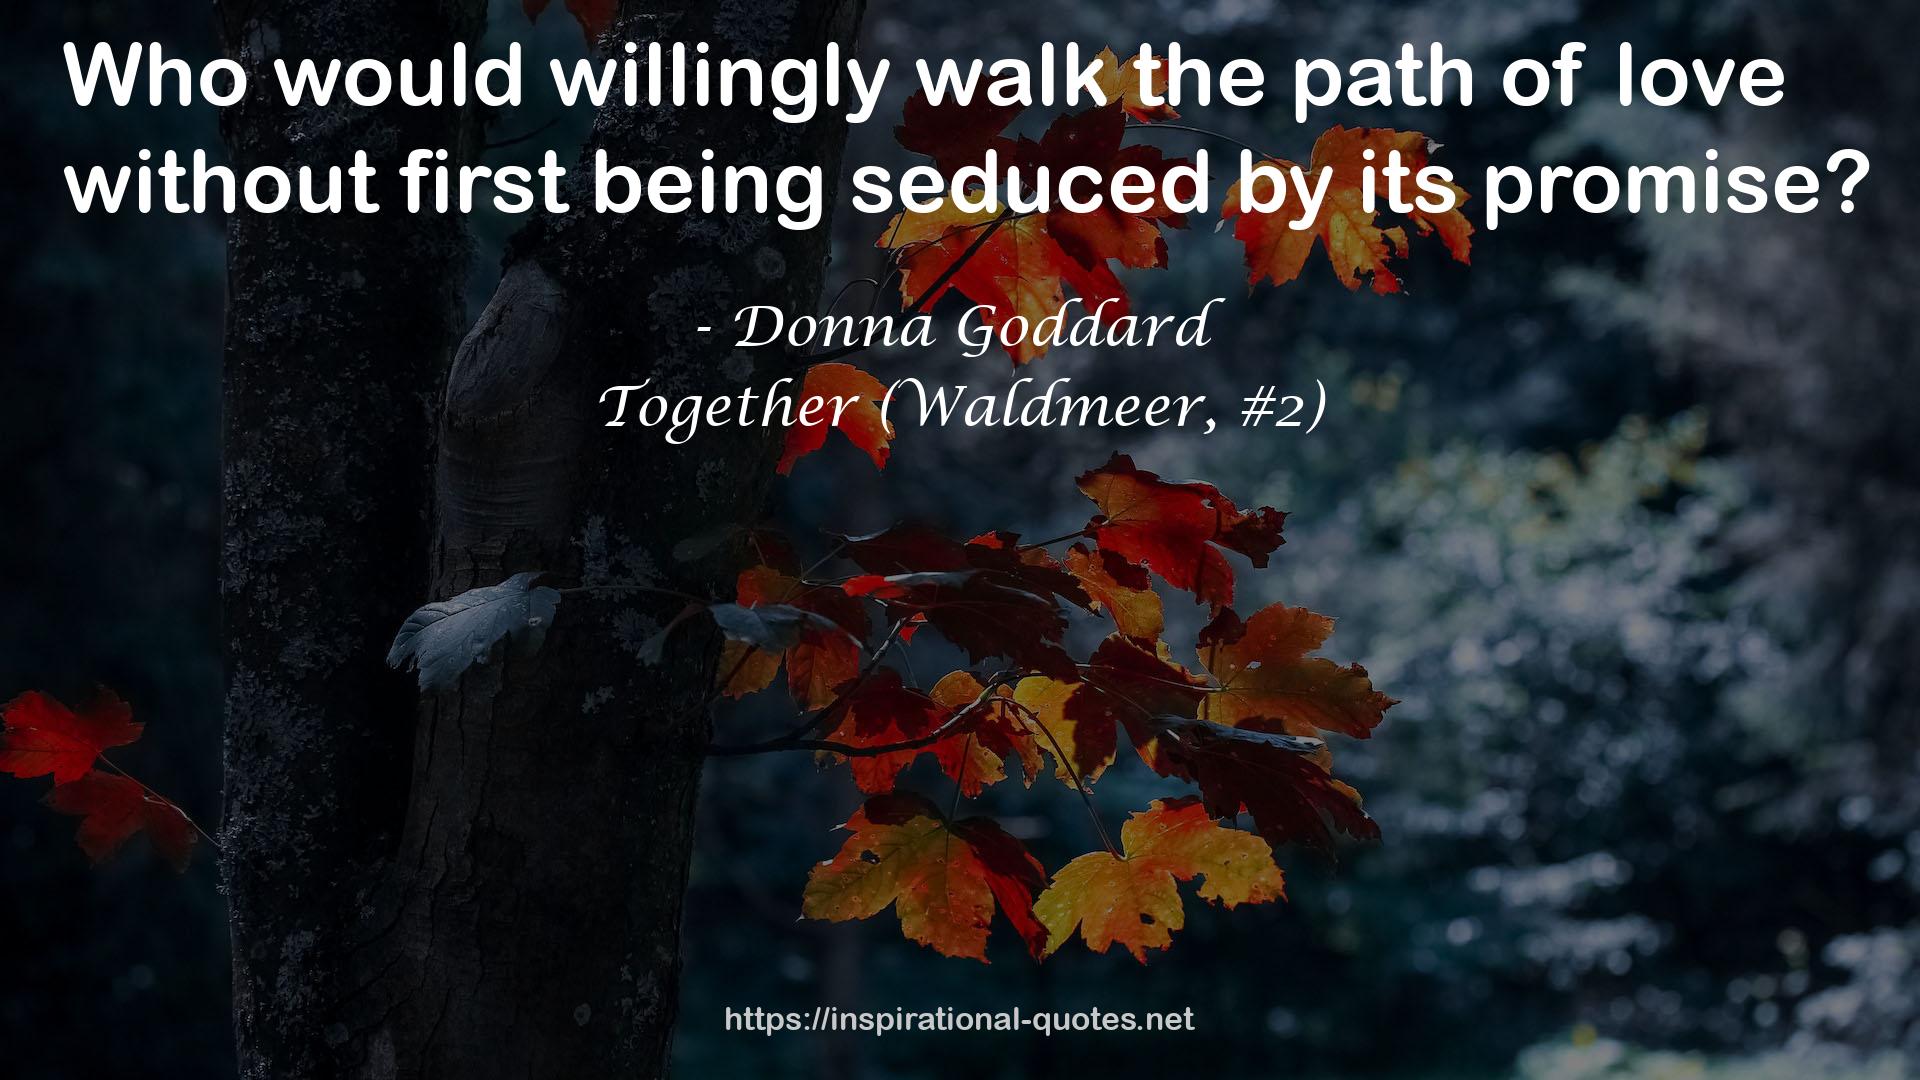 Together (Waldmeer, #2) QUOTES